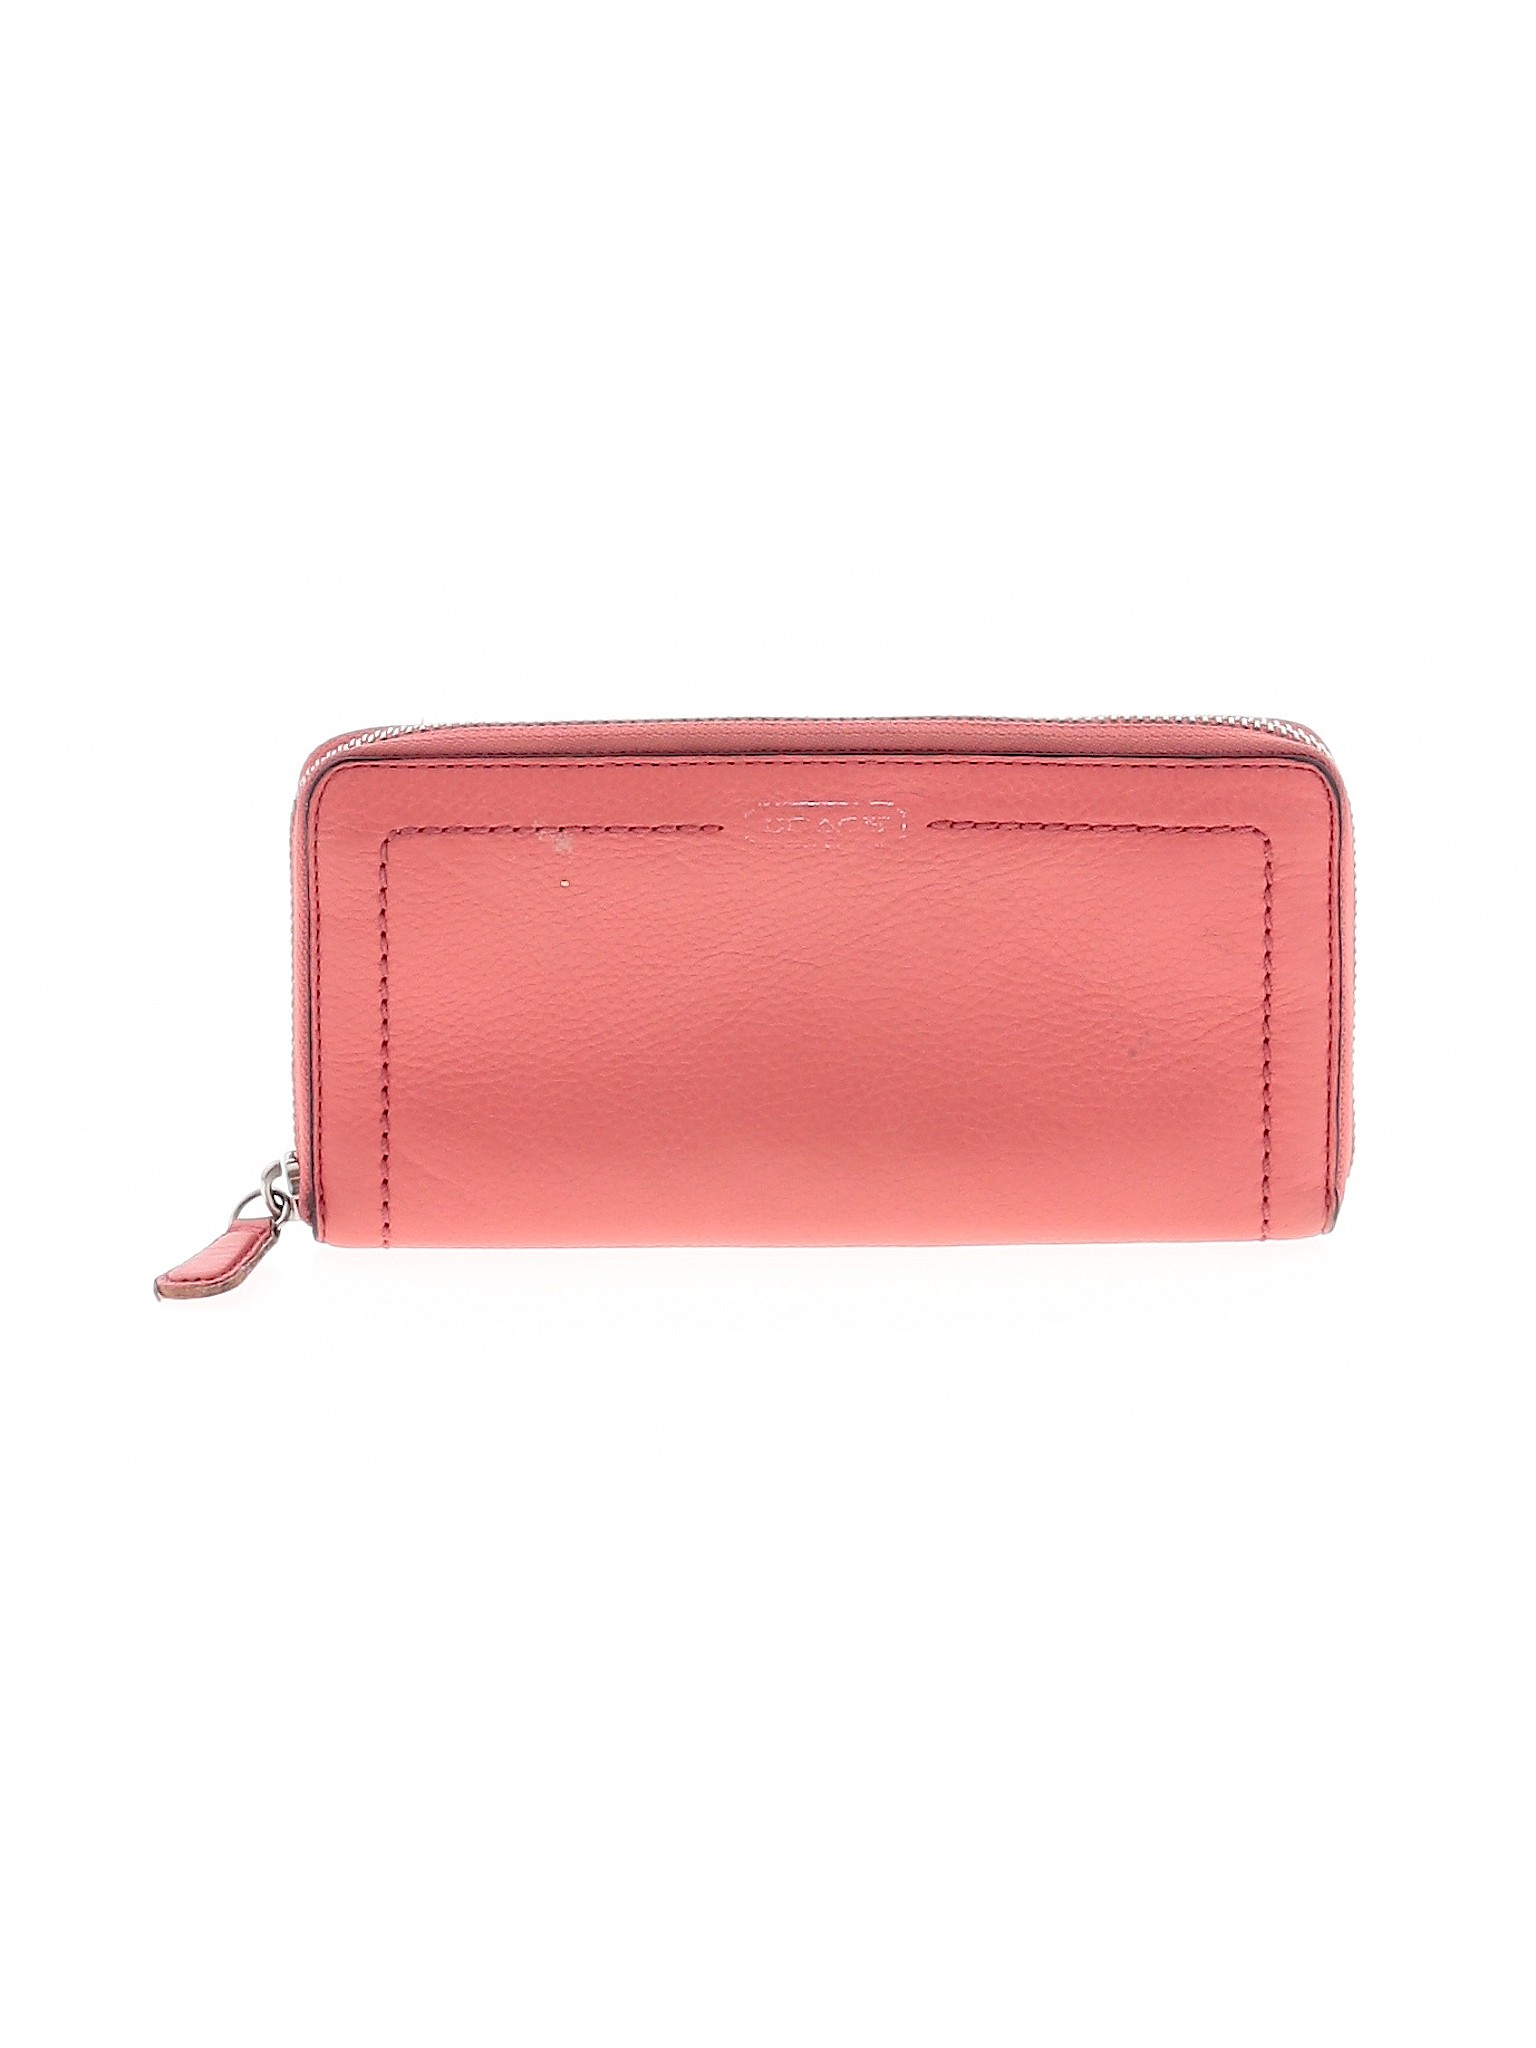 Coach 100% Leather Solid Pink Leather Wallet One Size - 78% off | thredUP